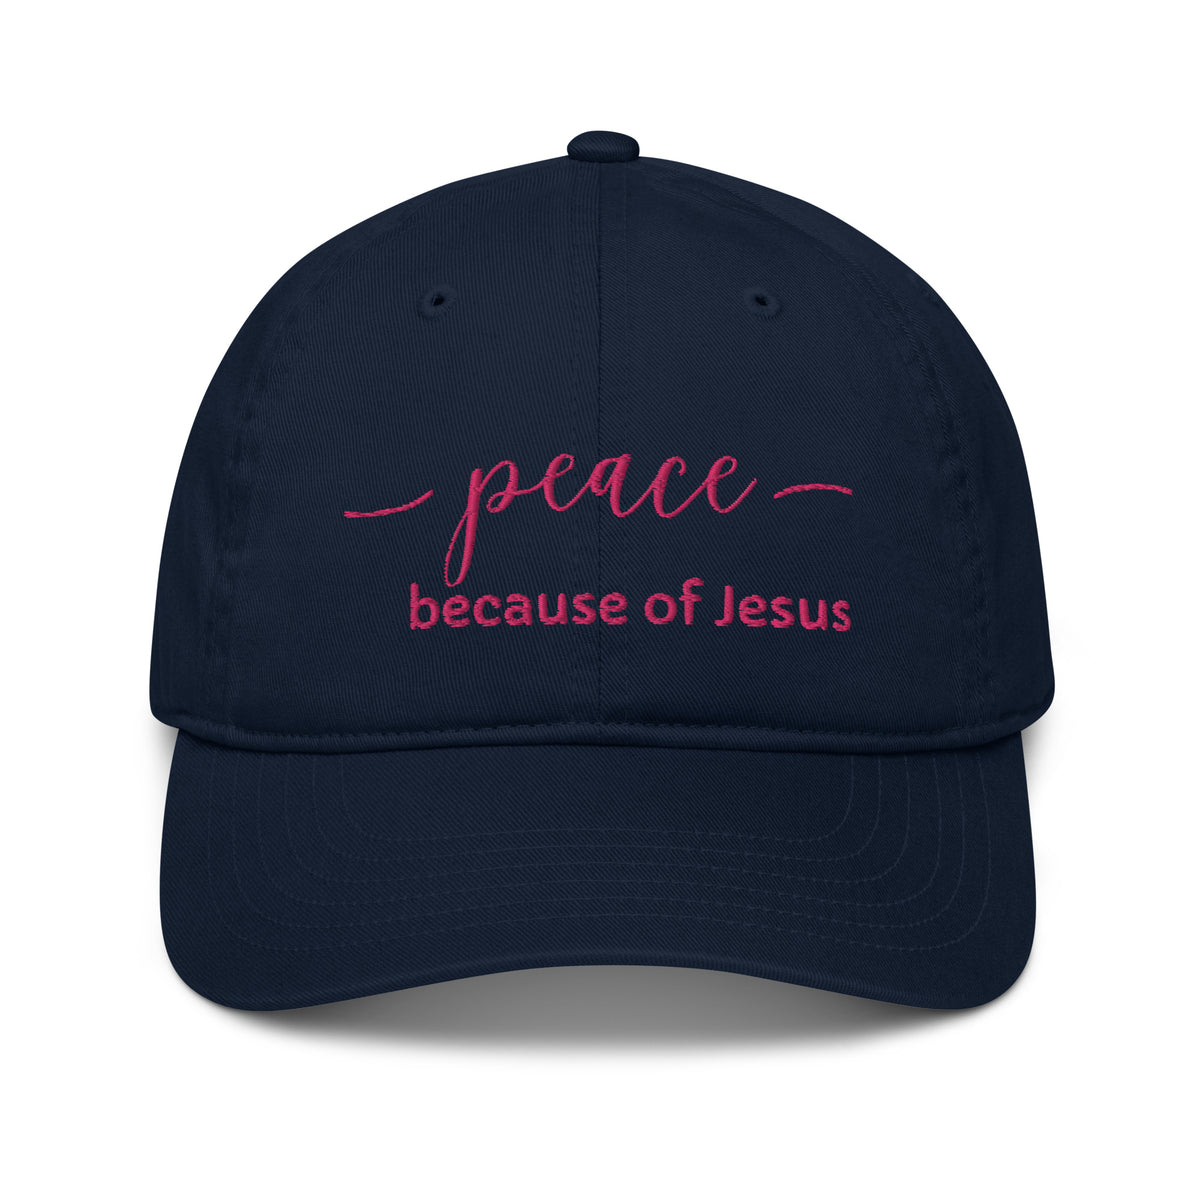 PEACE because of Jesus cap - 5 colors available